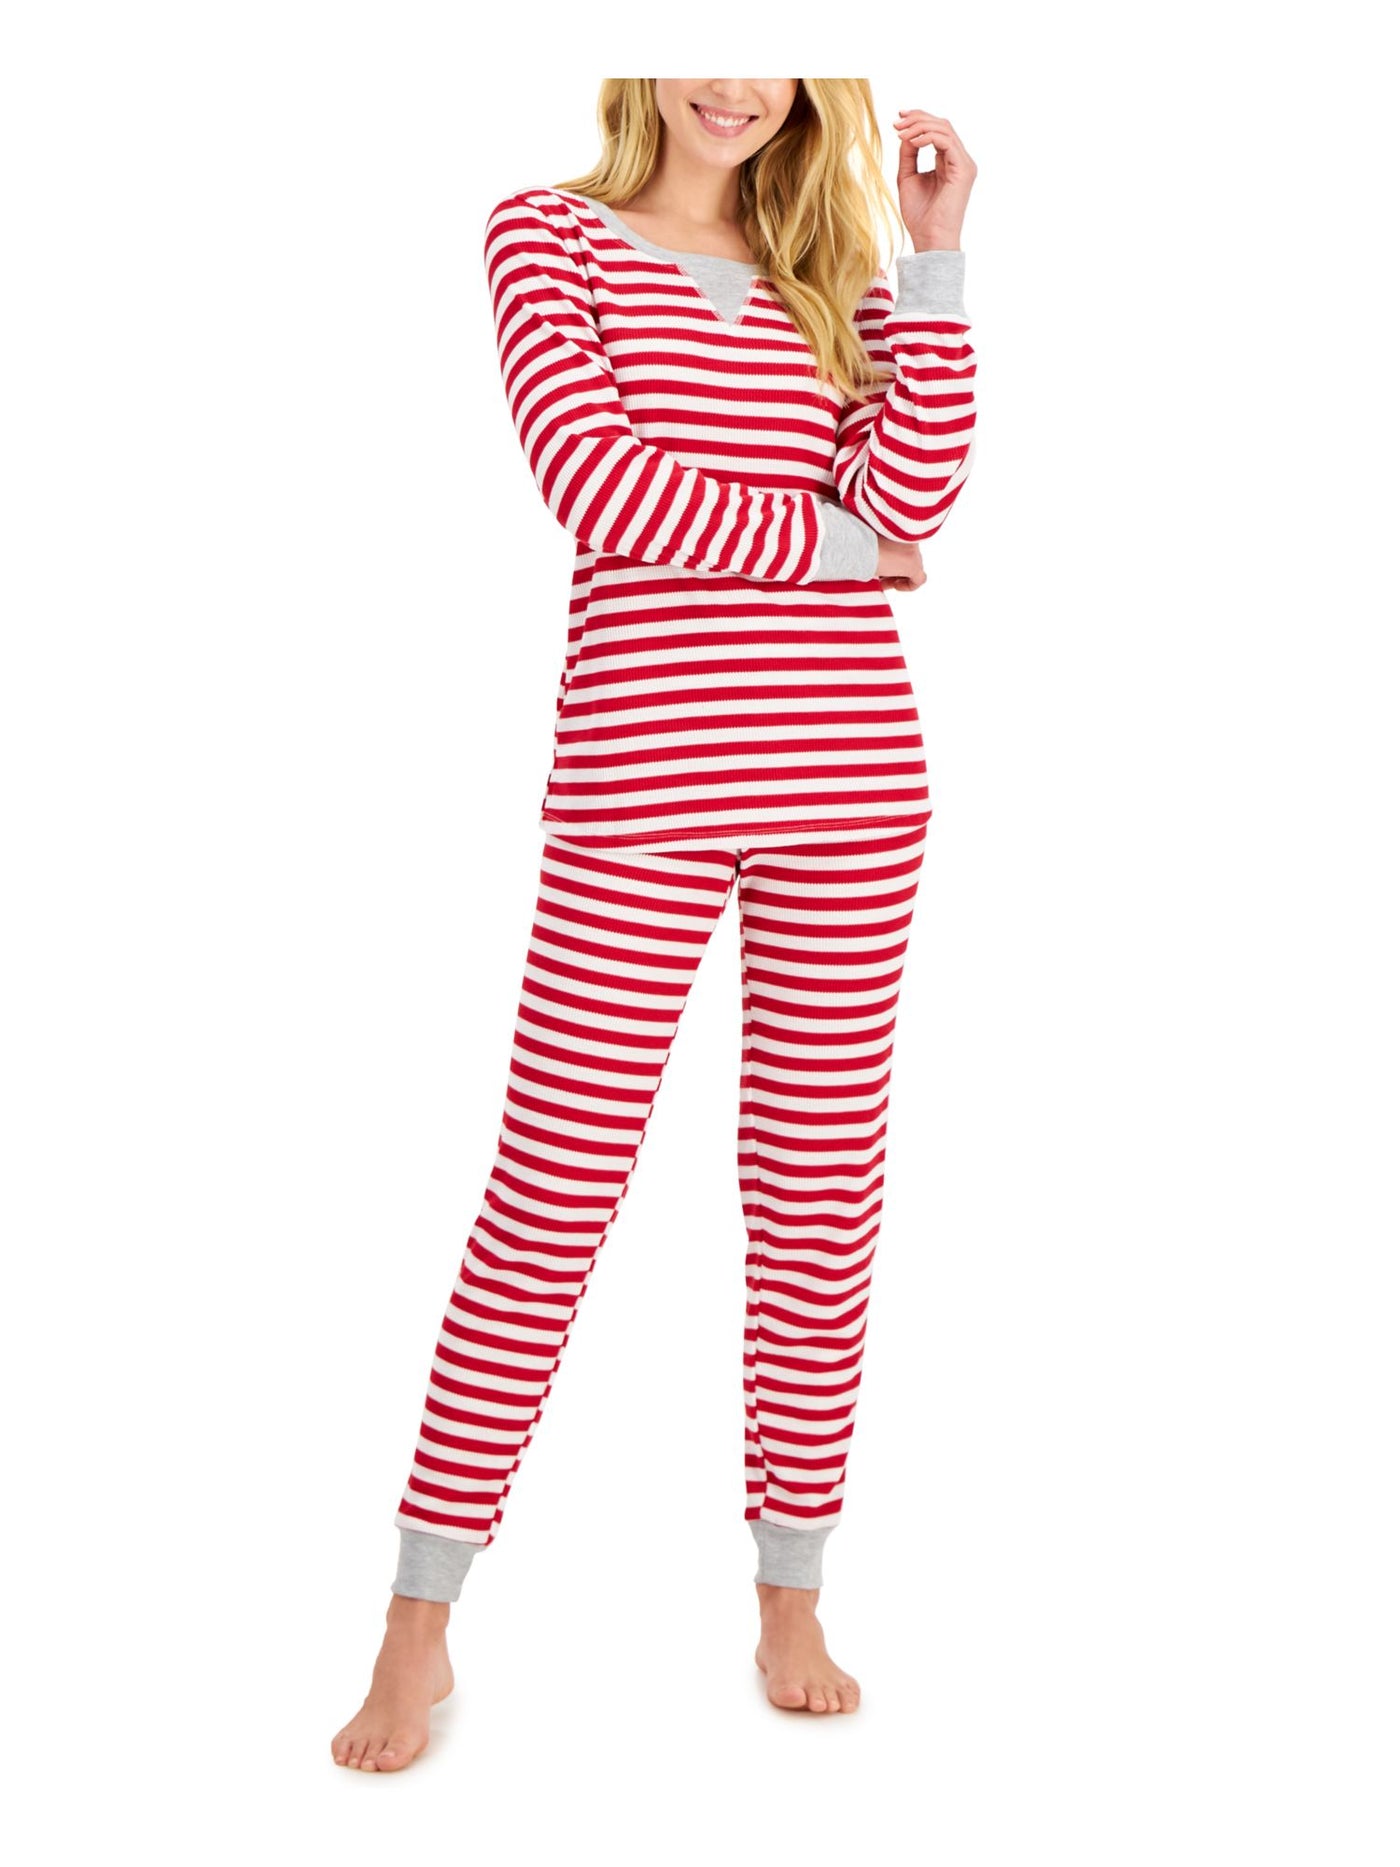 FAMILY PJs Womens White Striped Top Ribbed Long Sleeve Cuffed Pants Pajamas S